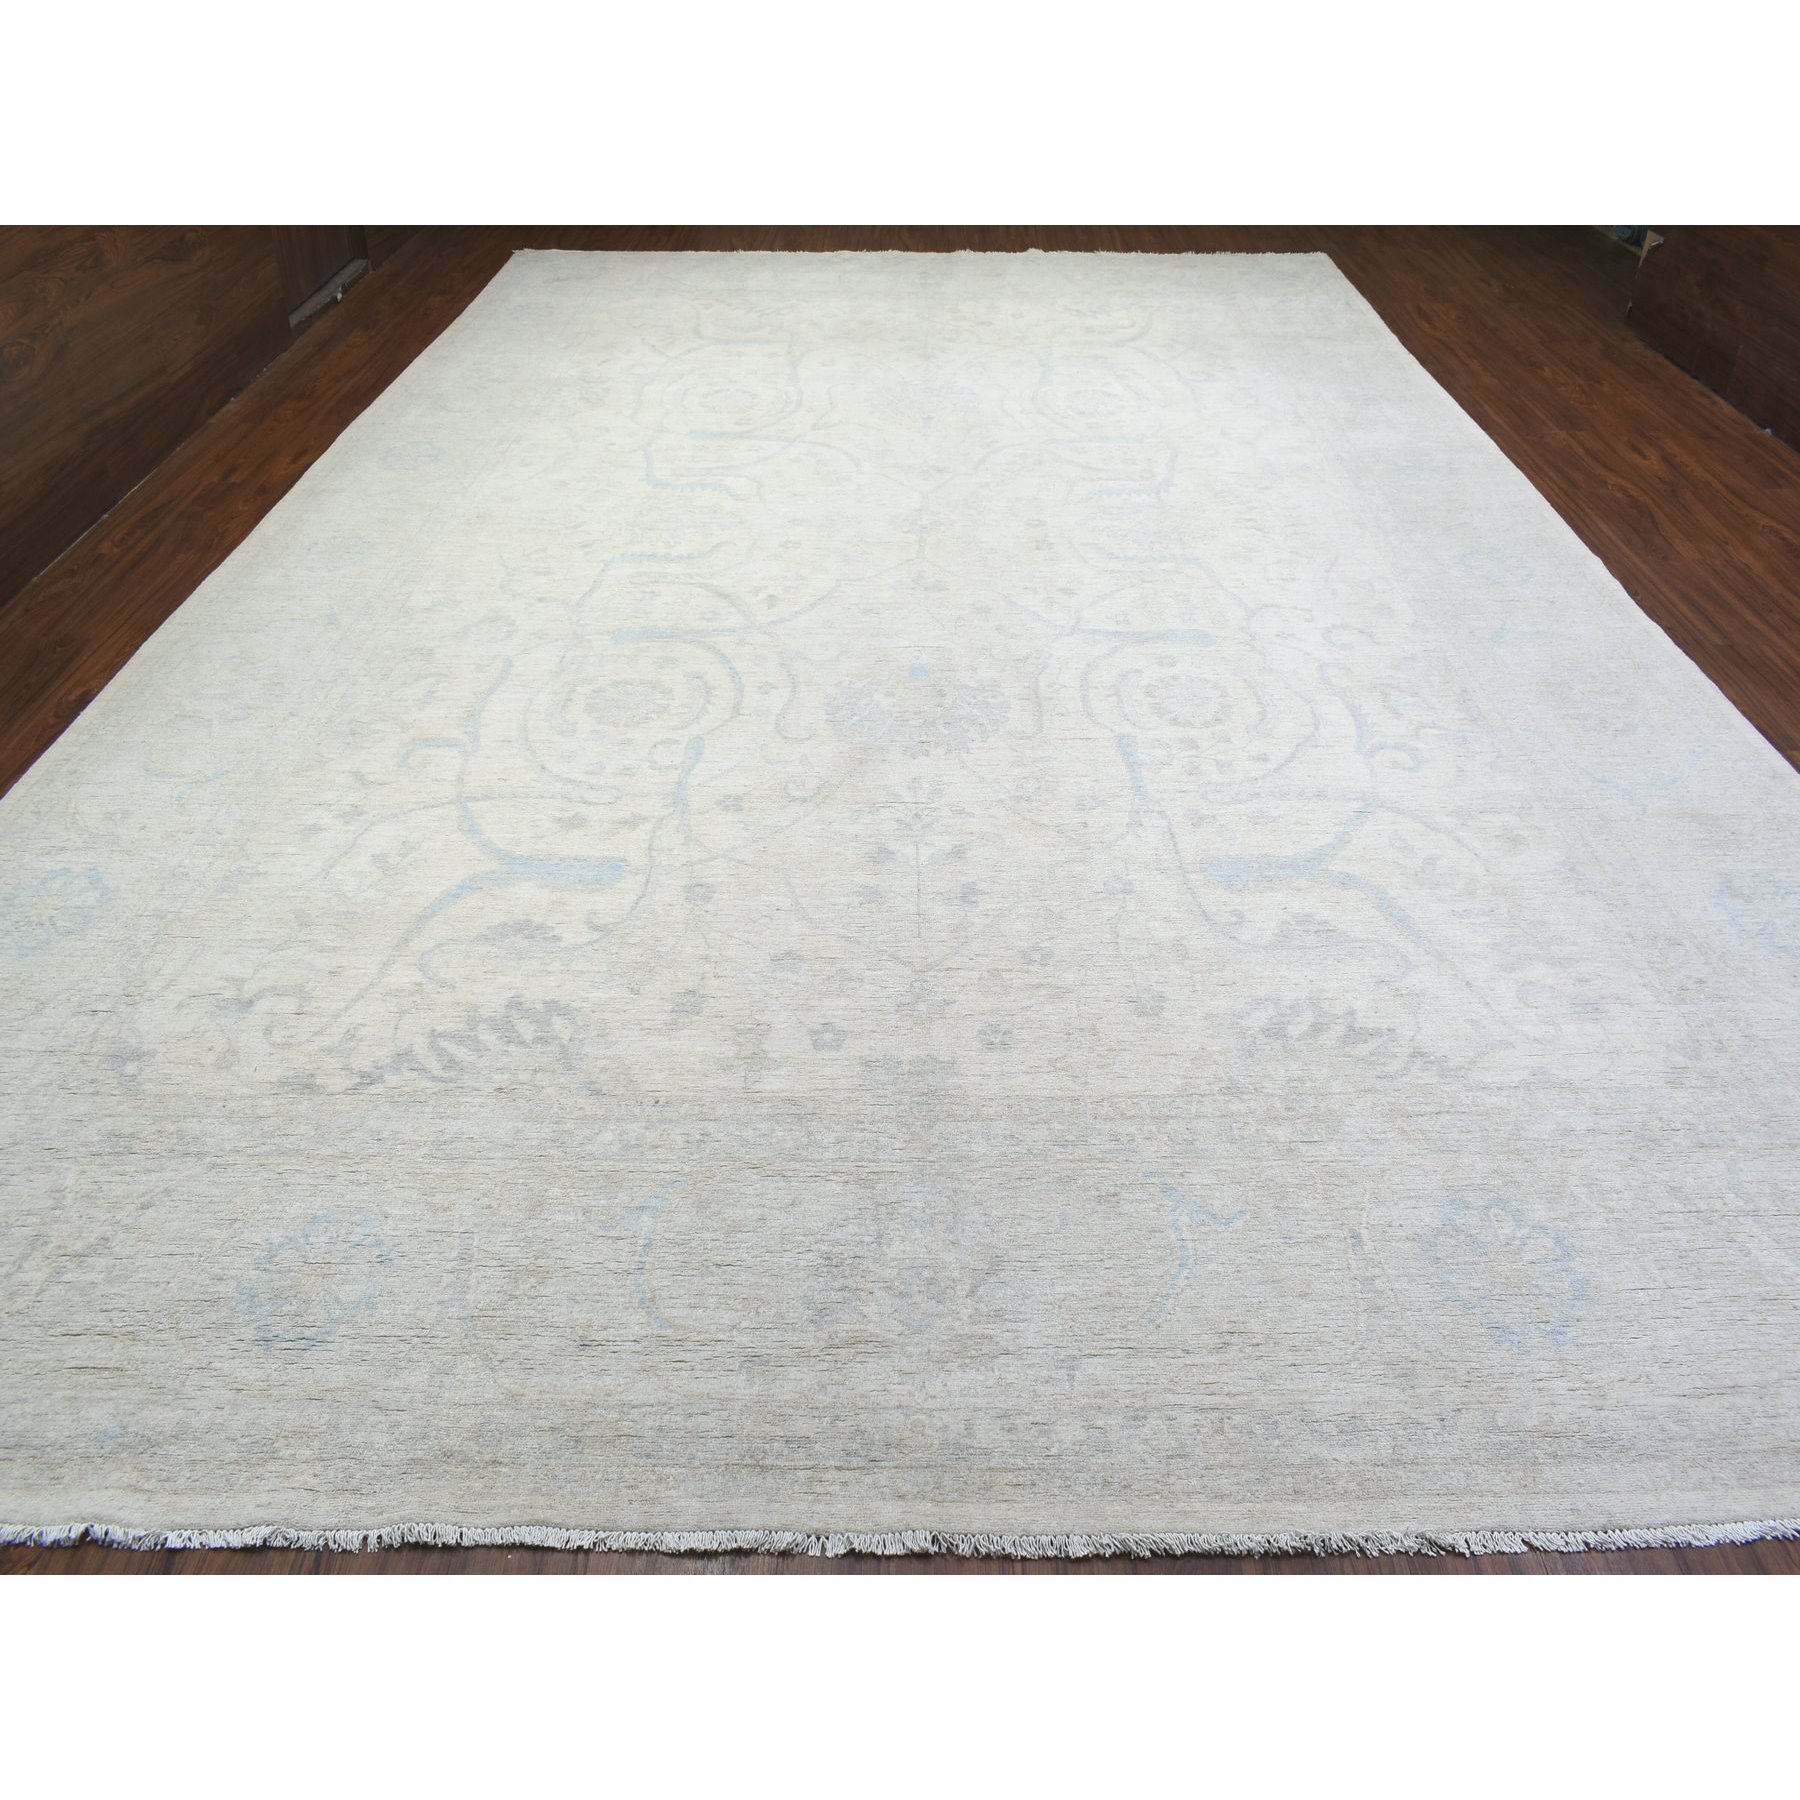 11'9"x17'10" Ivory, Soft Organic Wool Hand Woven, White Wash Peshawar with All Over Design Natural Dyes, Oversized Oriental Rug 